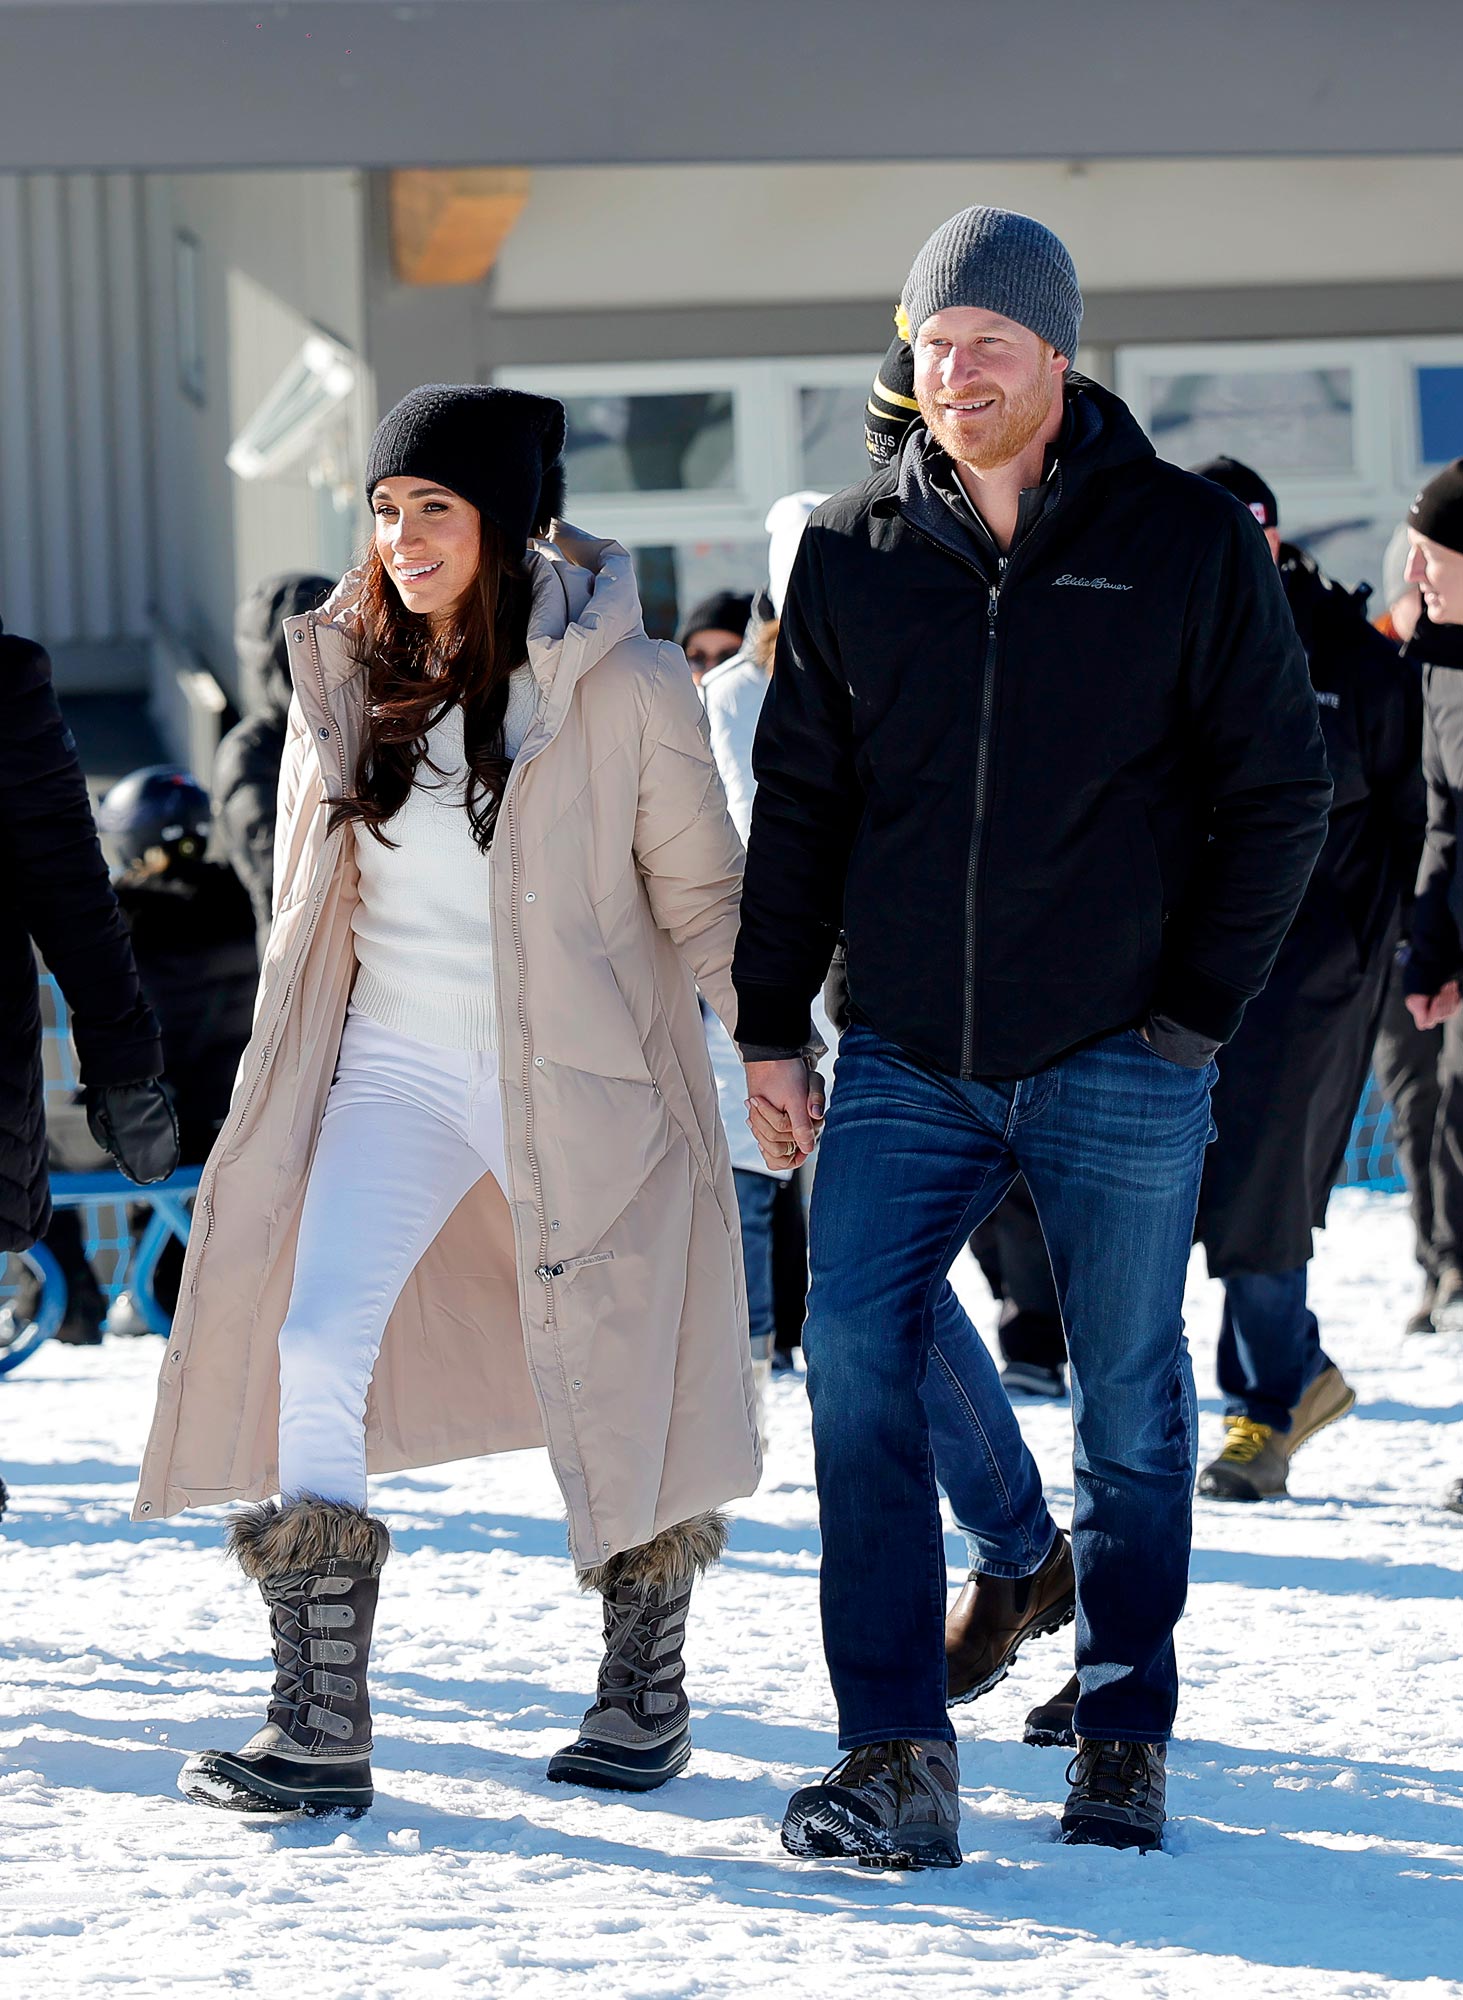 Prince Harry and Meghan Markle Hold Hands in Canada on Valentine's Day